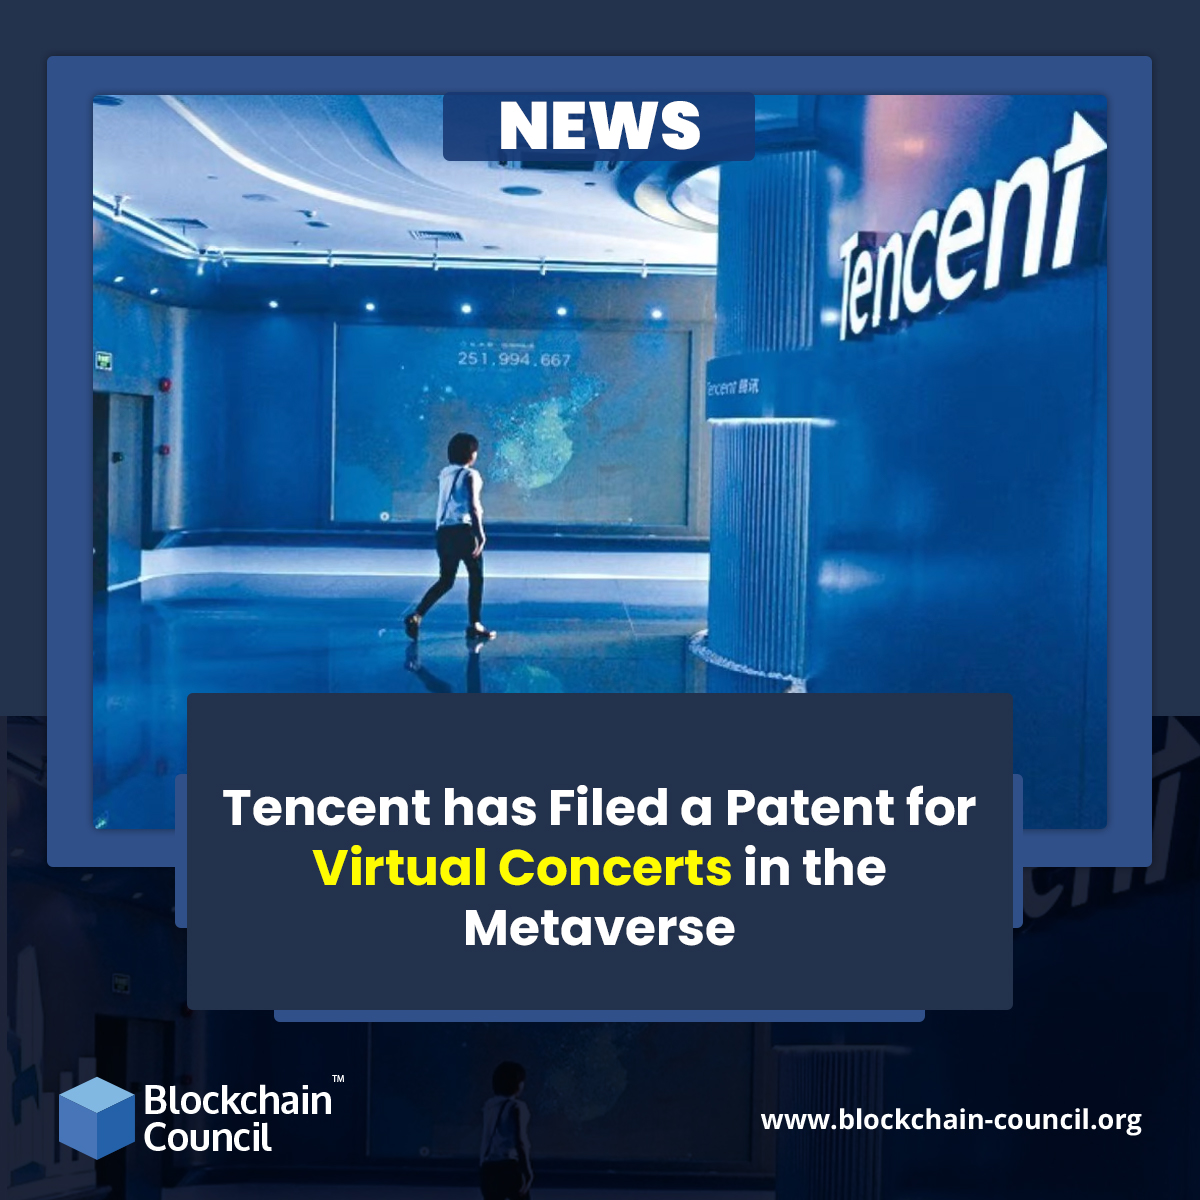 Tencent has Filed a Patent for Virtual Concerts in the Metaverse